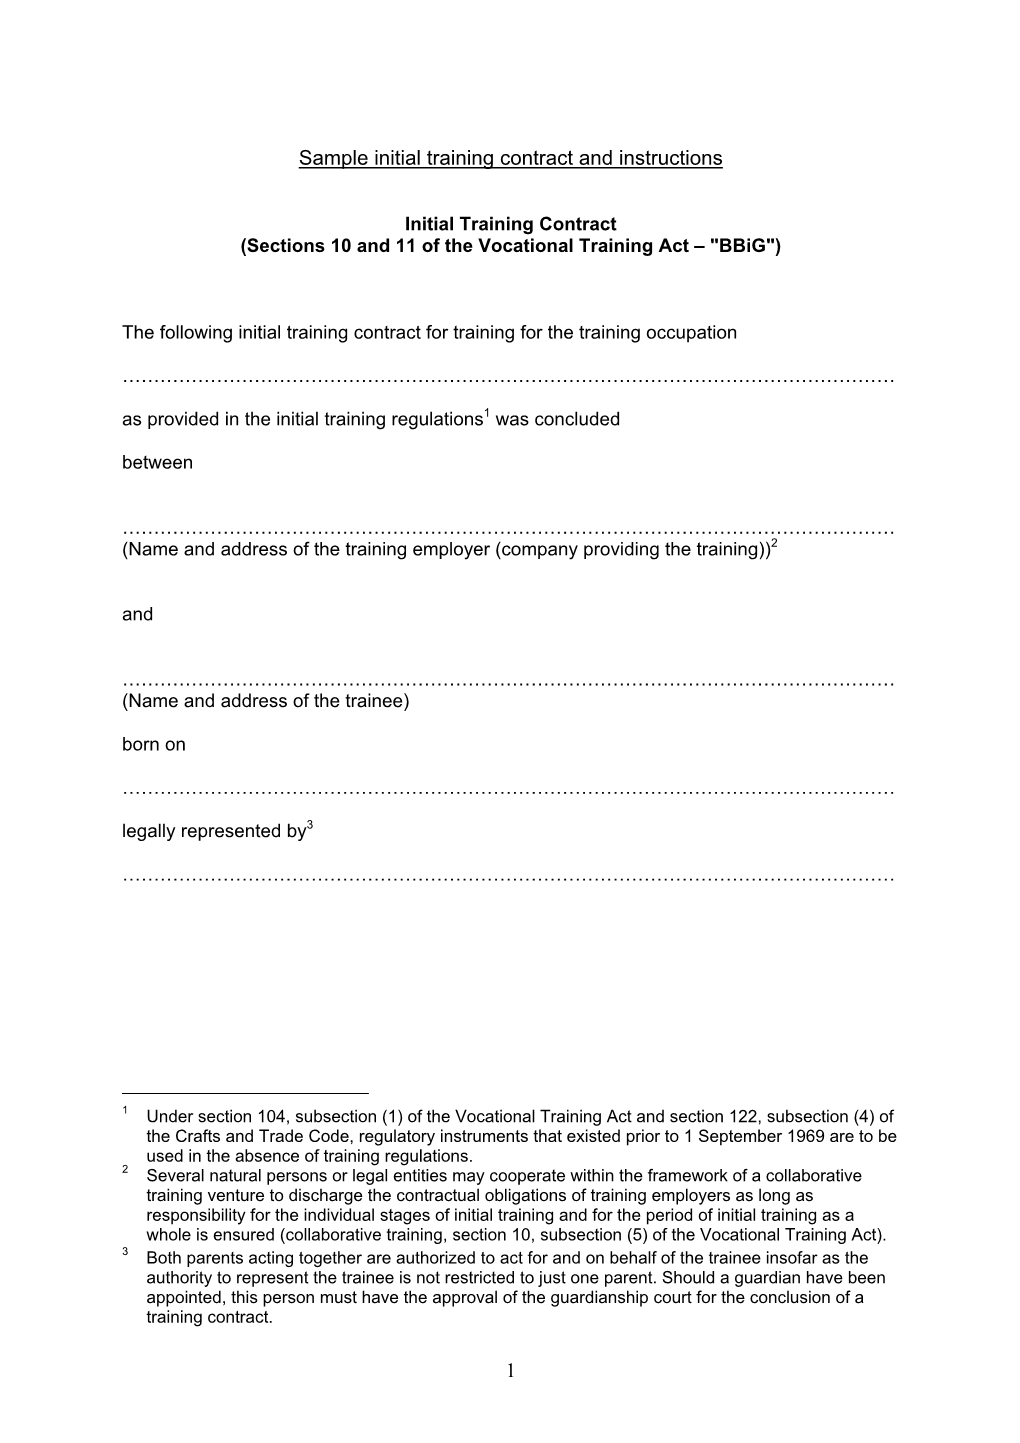 Sample Initial Training Contract and Instructions